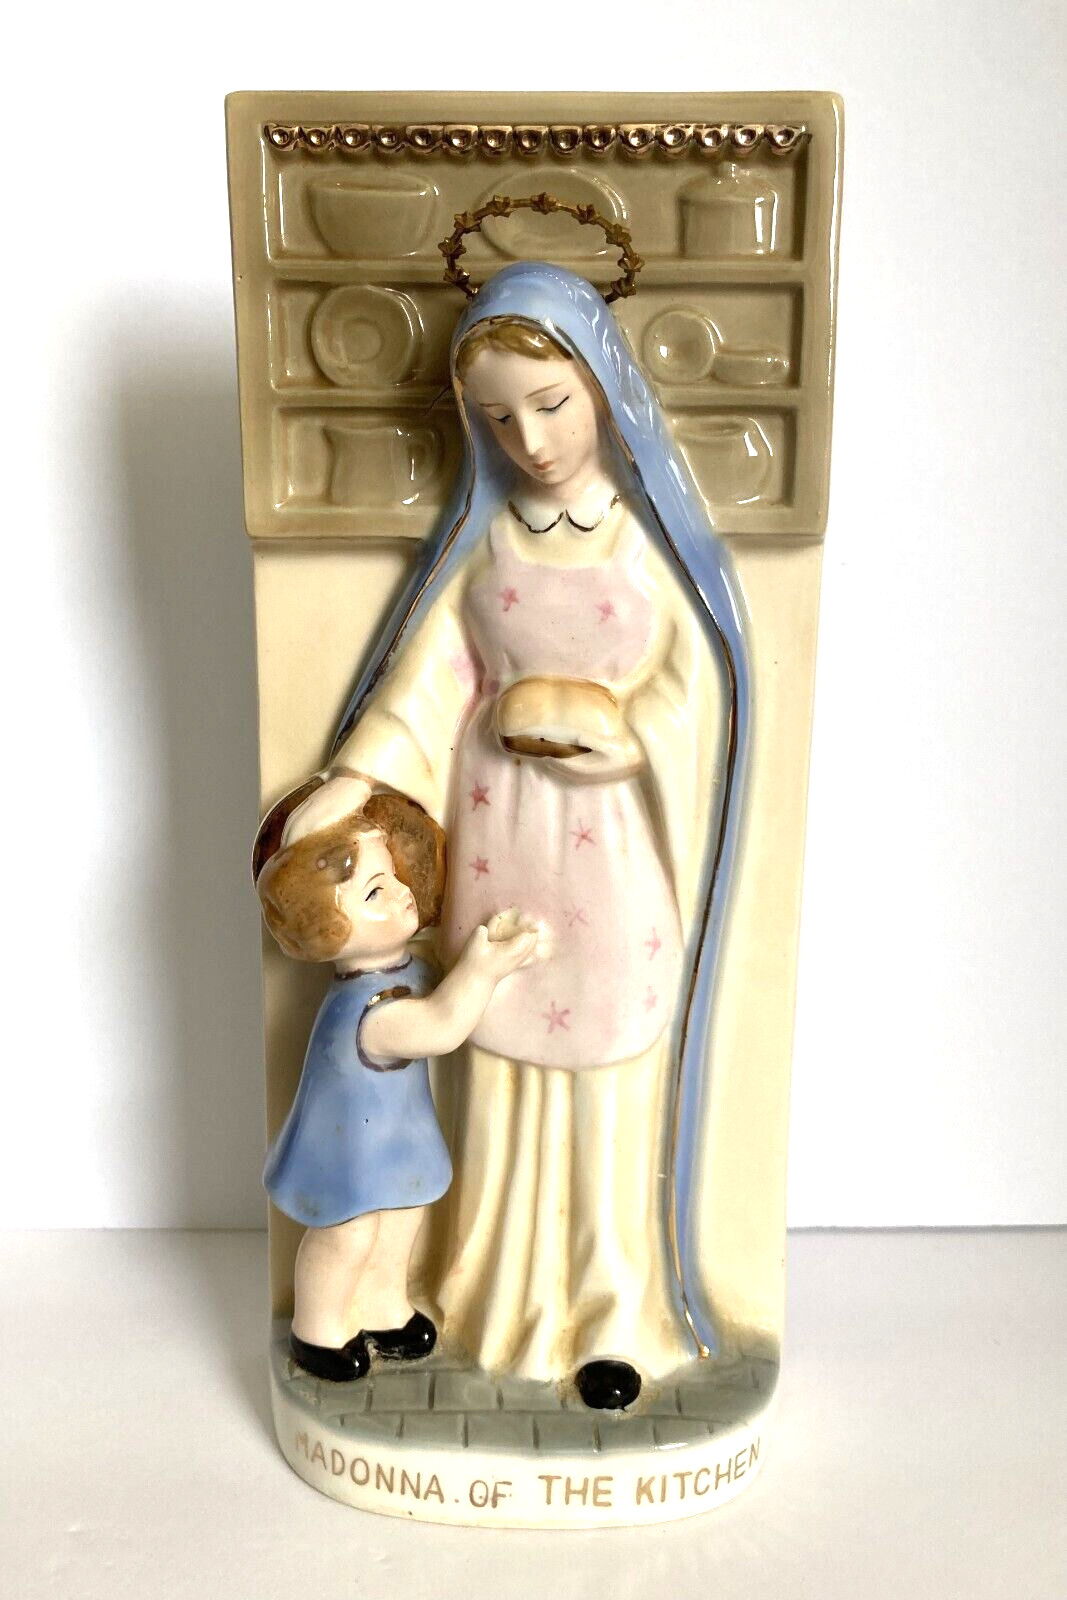 Madonna of the Kitchen Wall Plaque / Figurine - Vintage 1950’s-60’s Ceramic